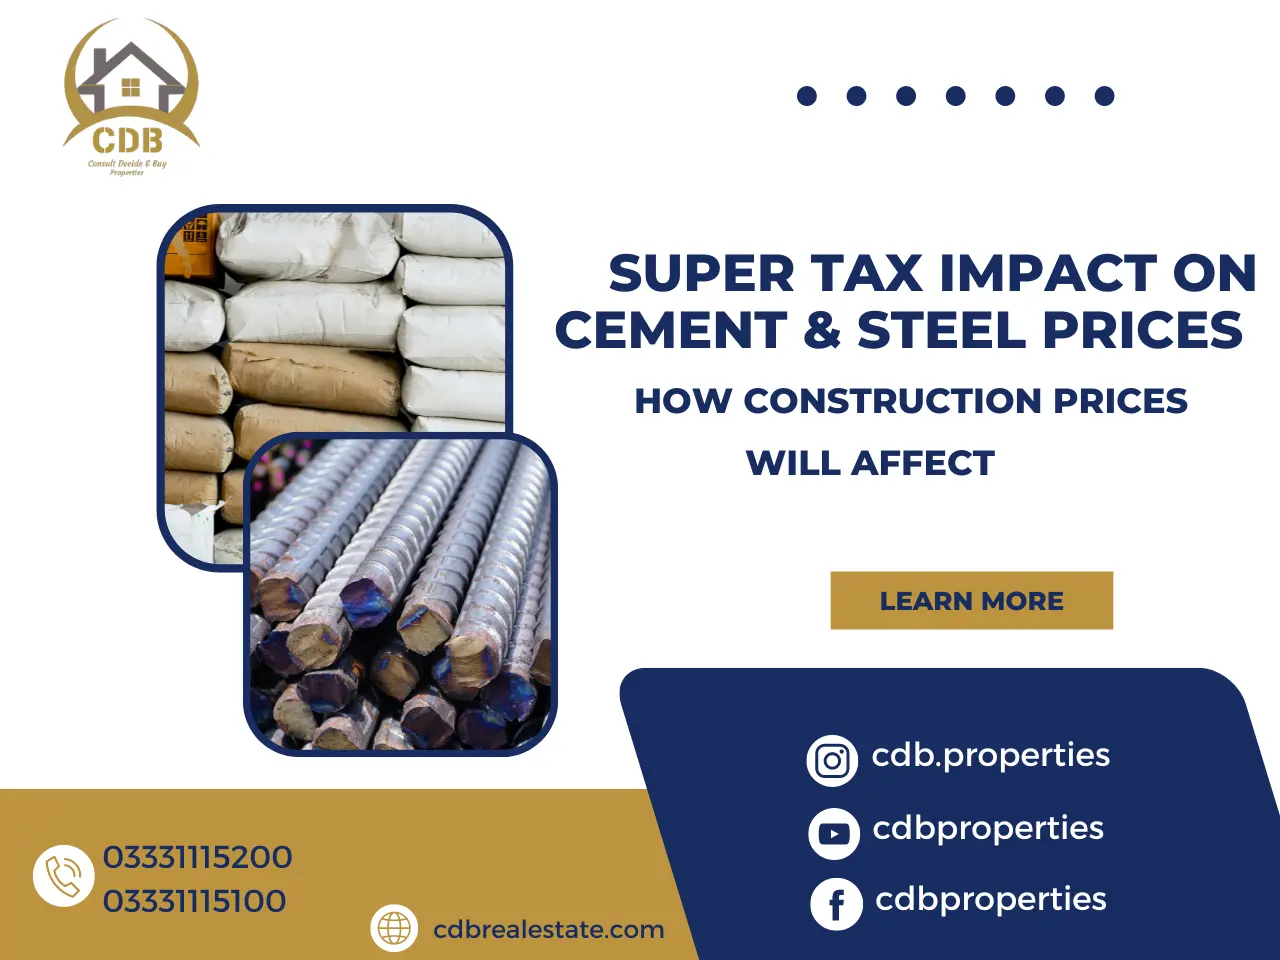 Super Tax Impact On Cement & Steel Prices How Construction Prices Will Affect